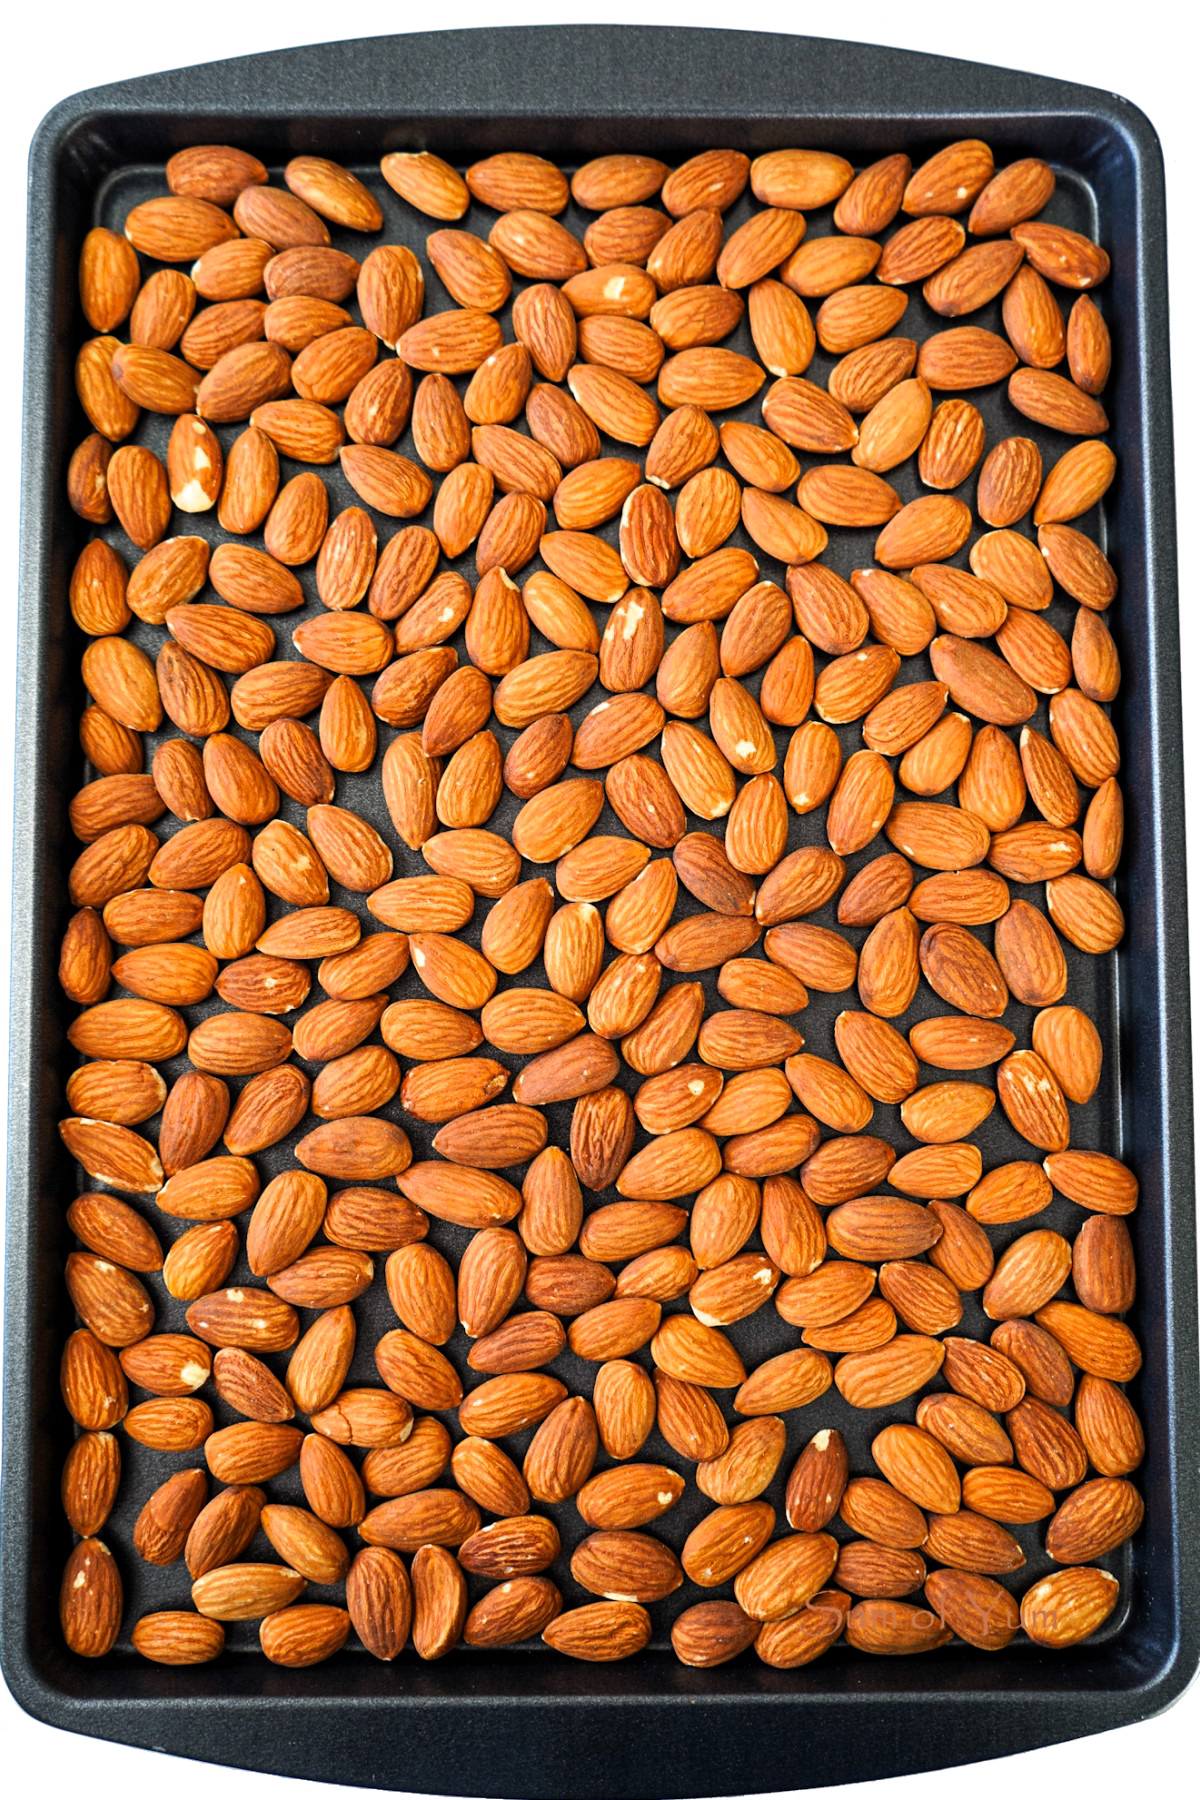 Dry Roasted Almonds on Sheet Pan